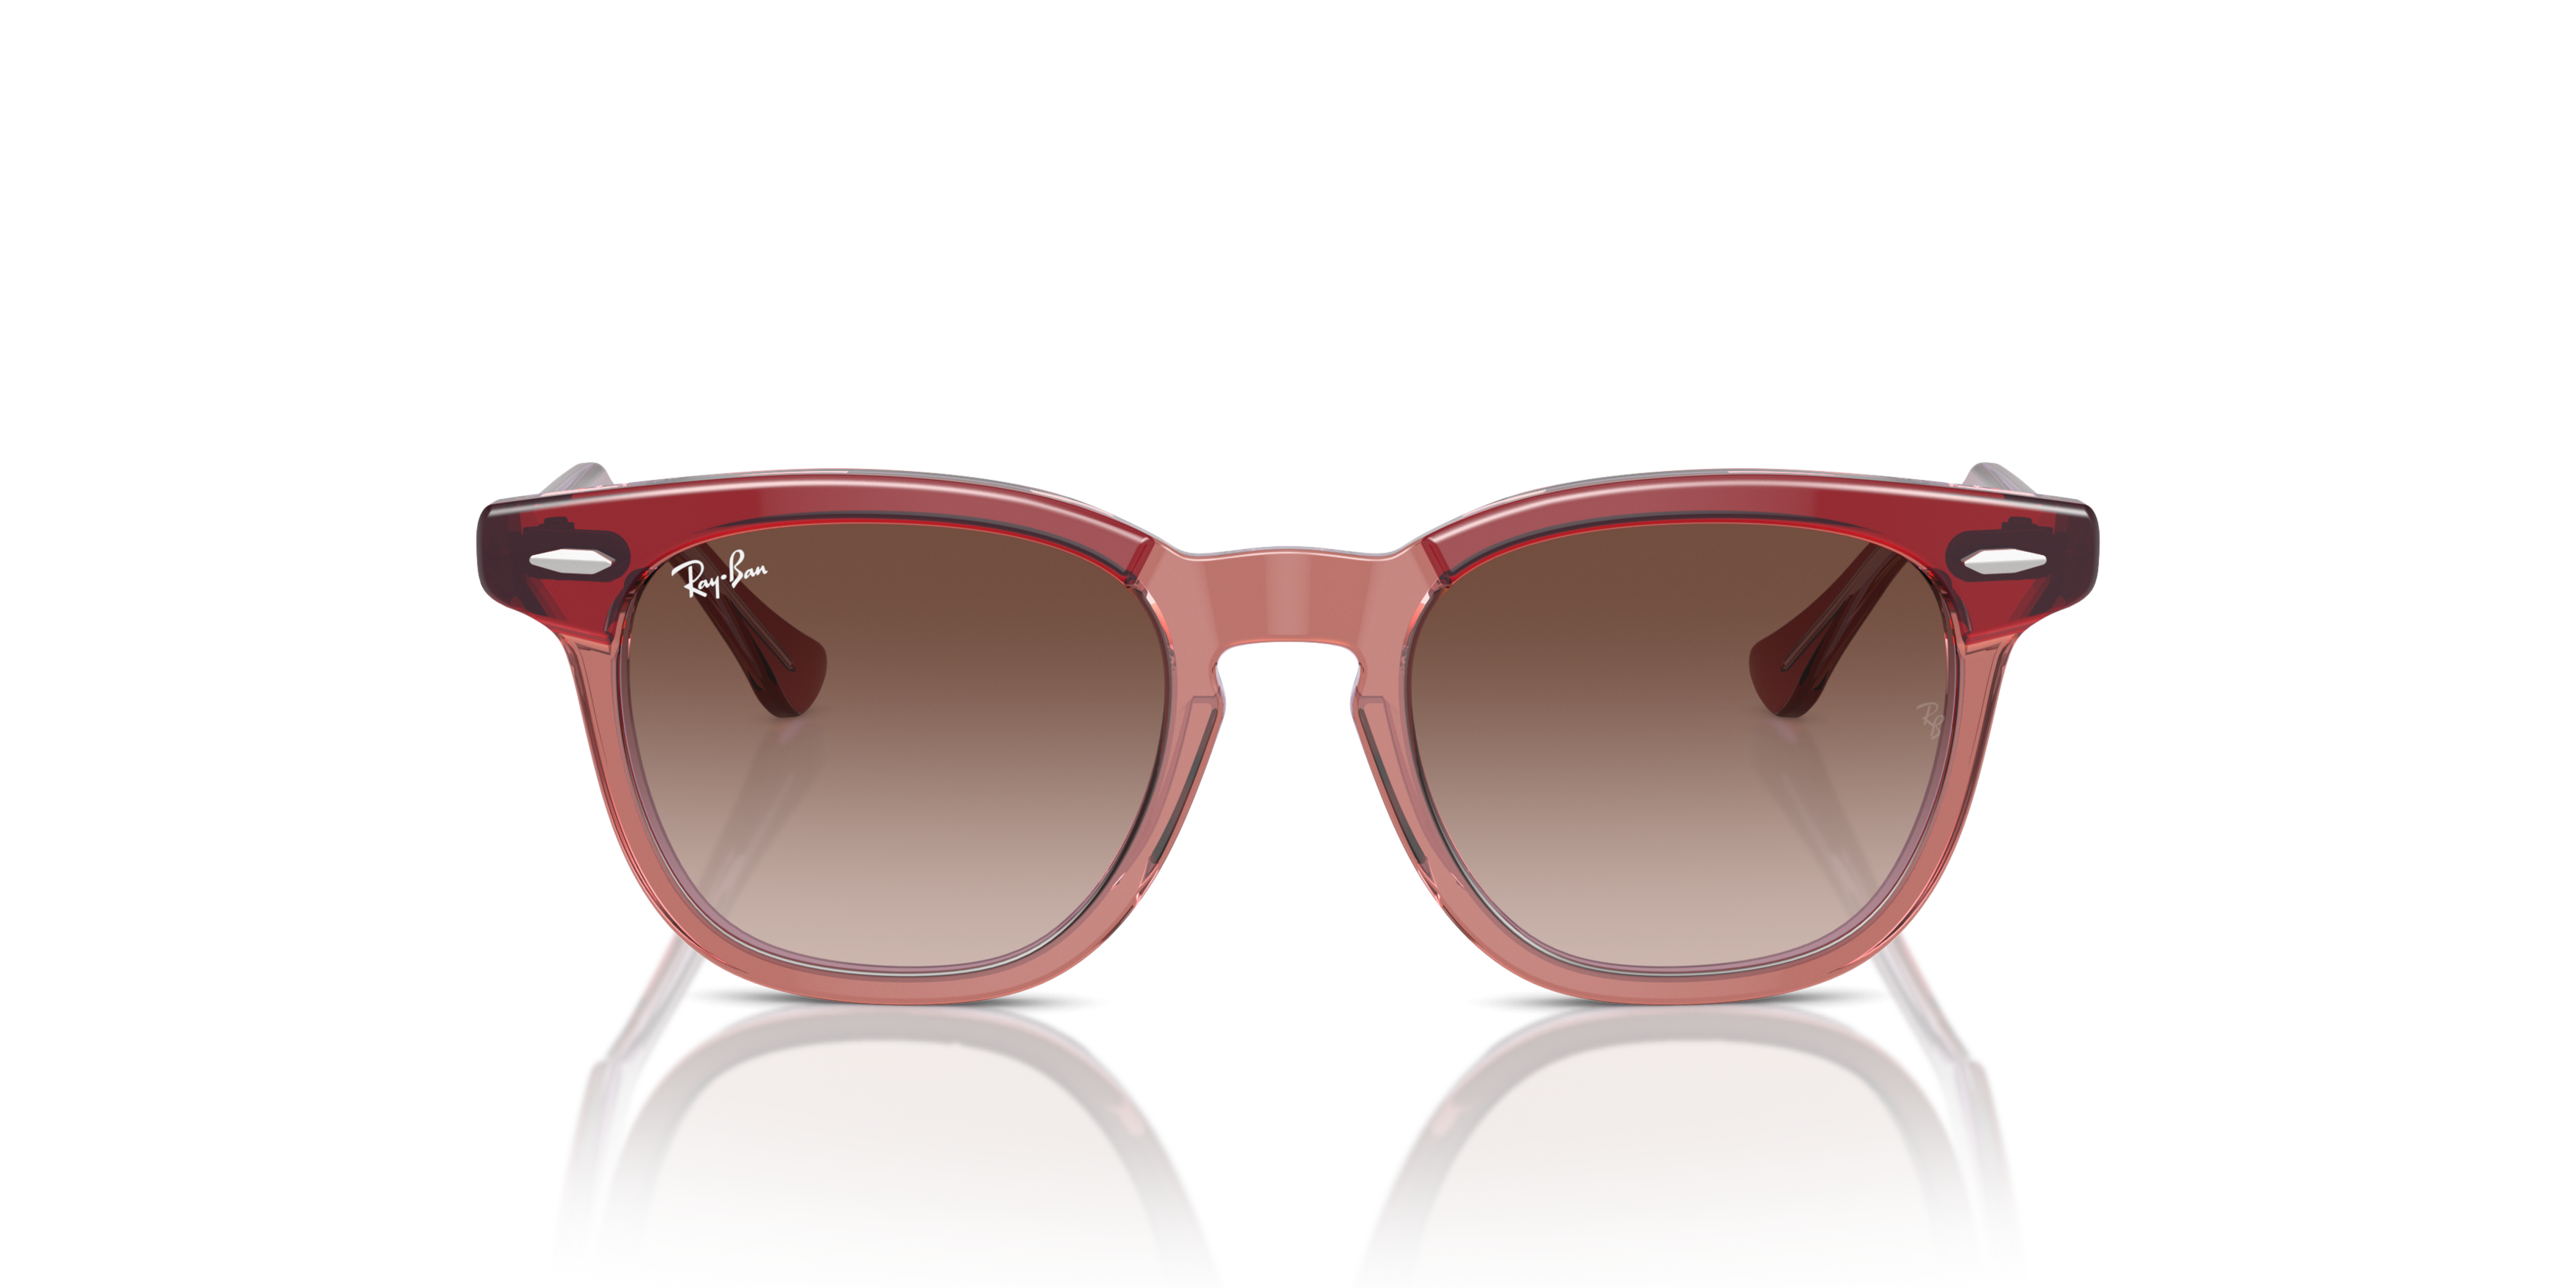 [products.image.front] RAY-BAN RJ9098S 715413